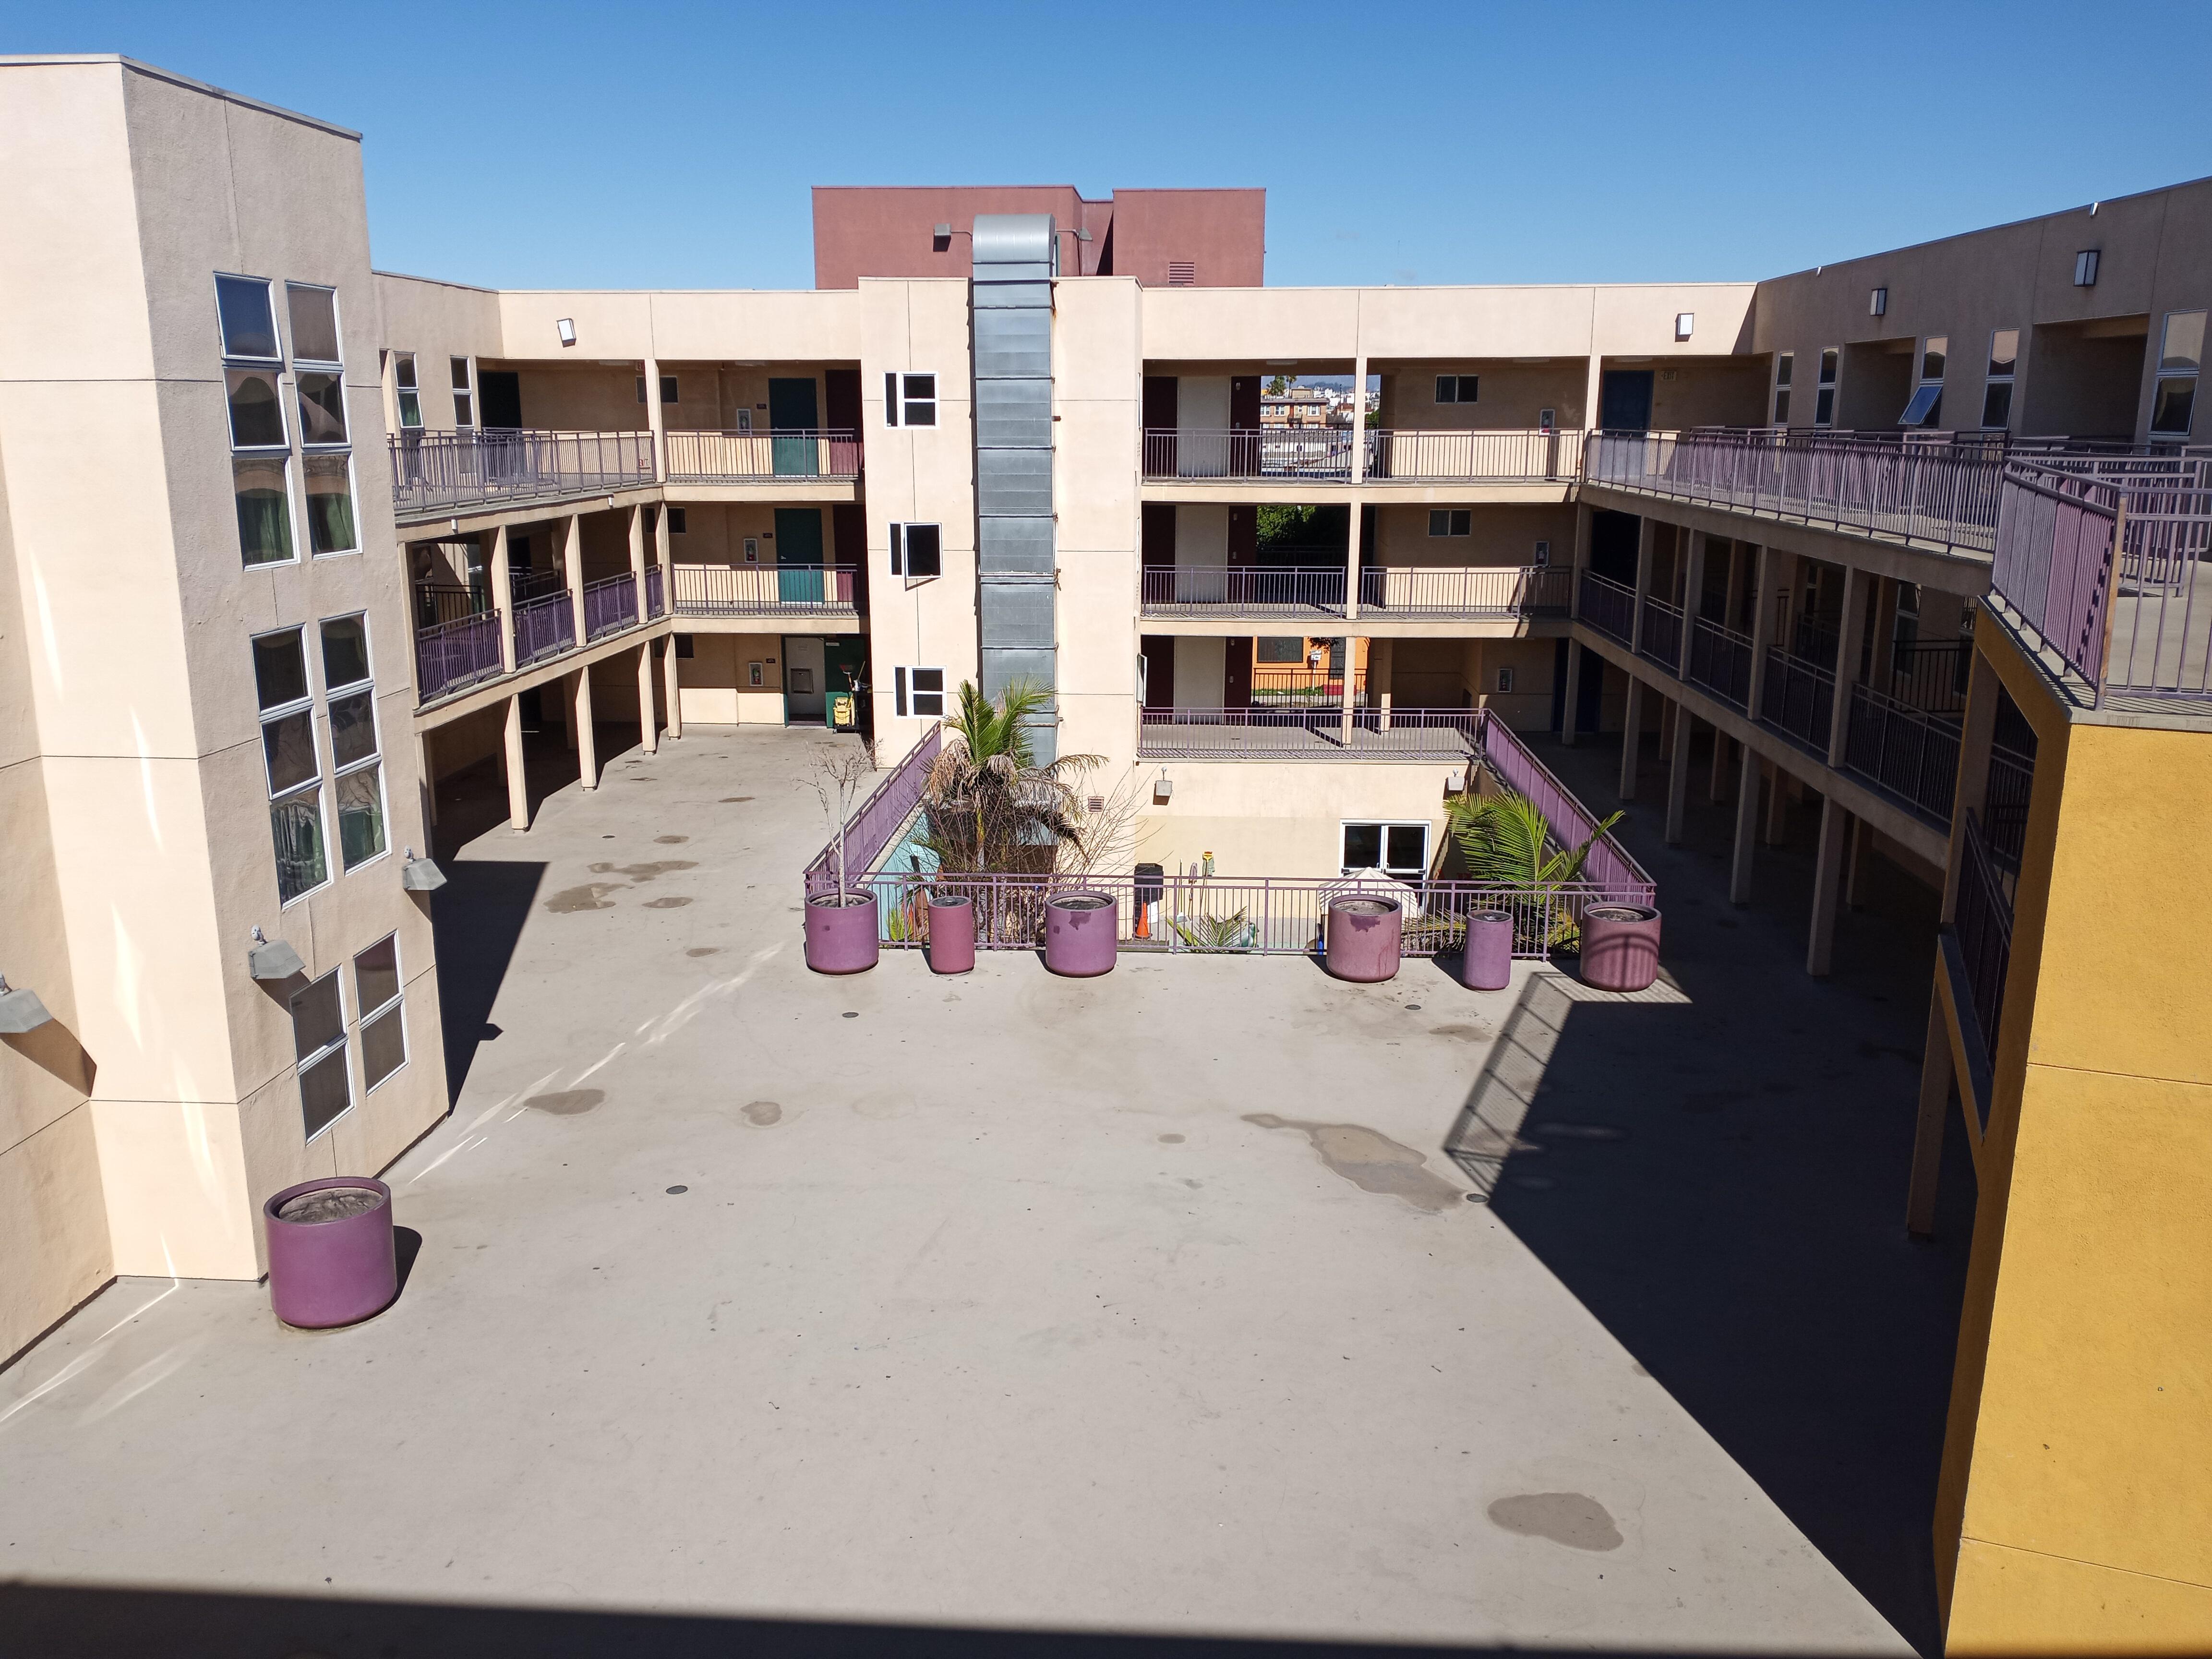 Exterior view of the courtyard/common area located in the center of the building.